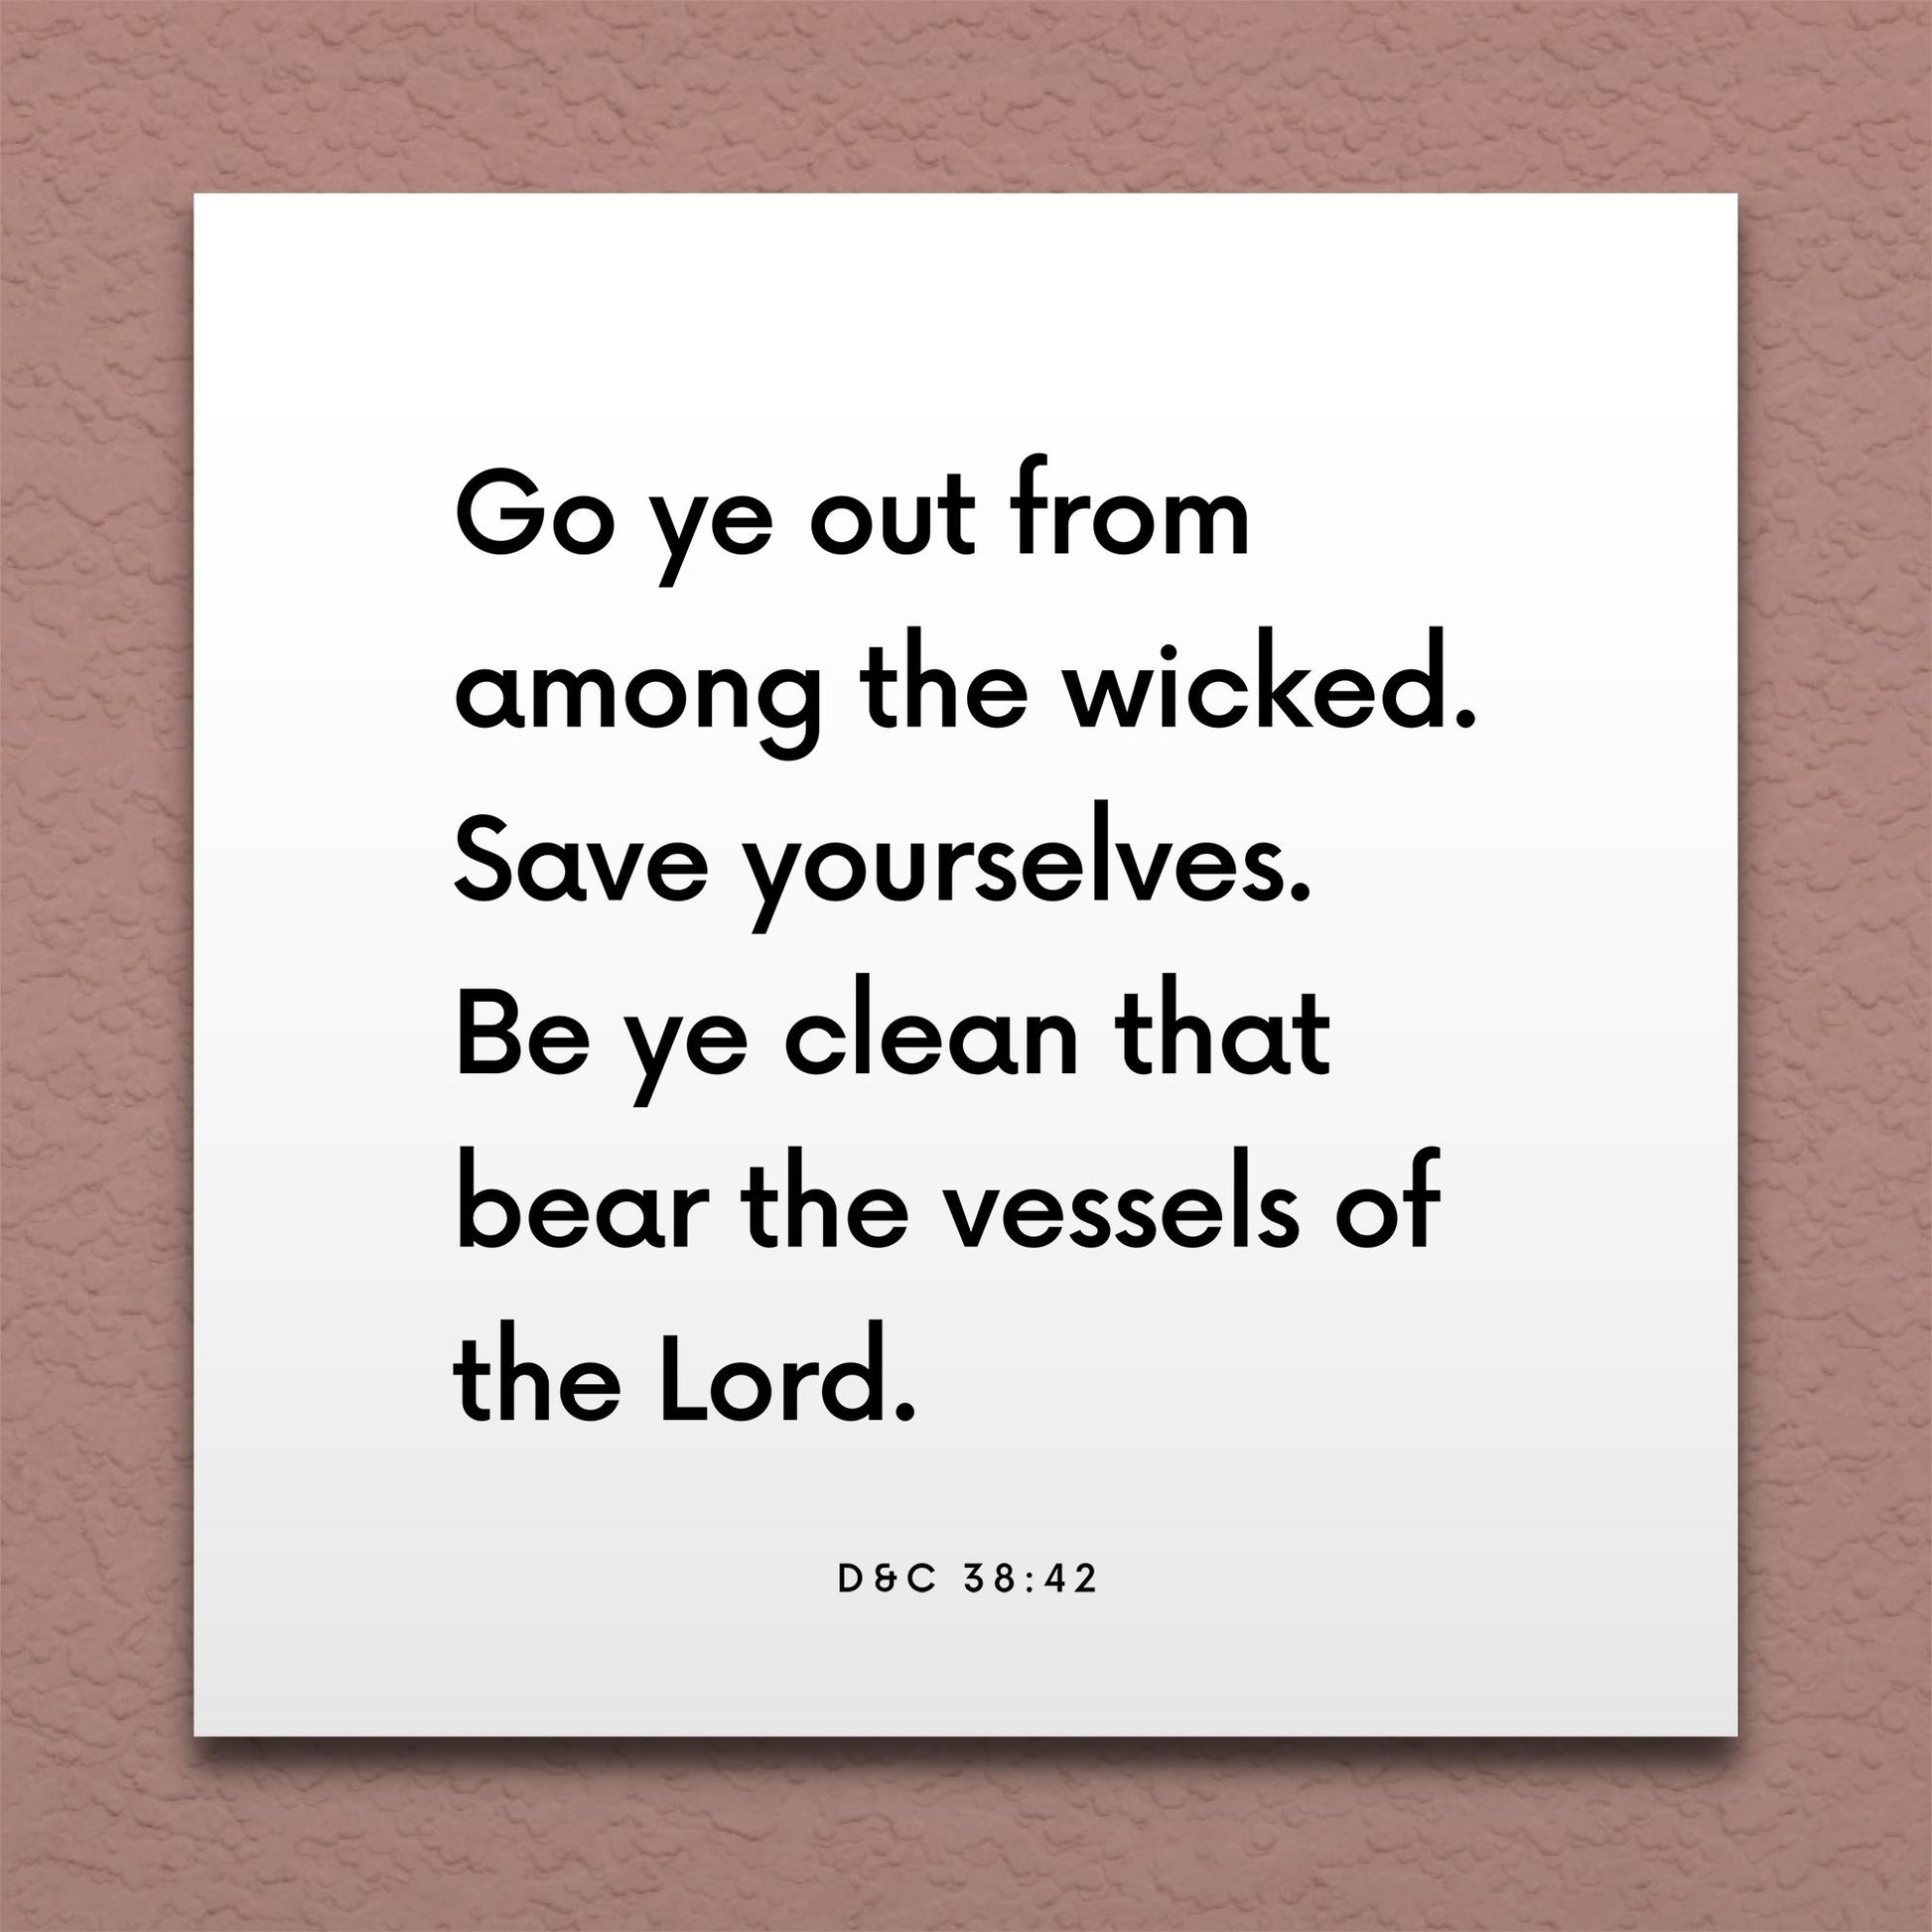 Wall-mounted scripture tile for D&C 38:42 - "Be ye clean that bear the vessels of the Lord"